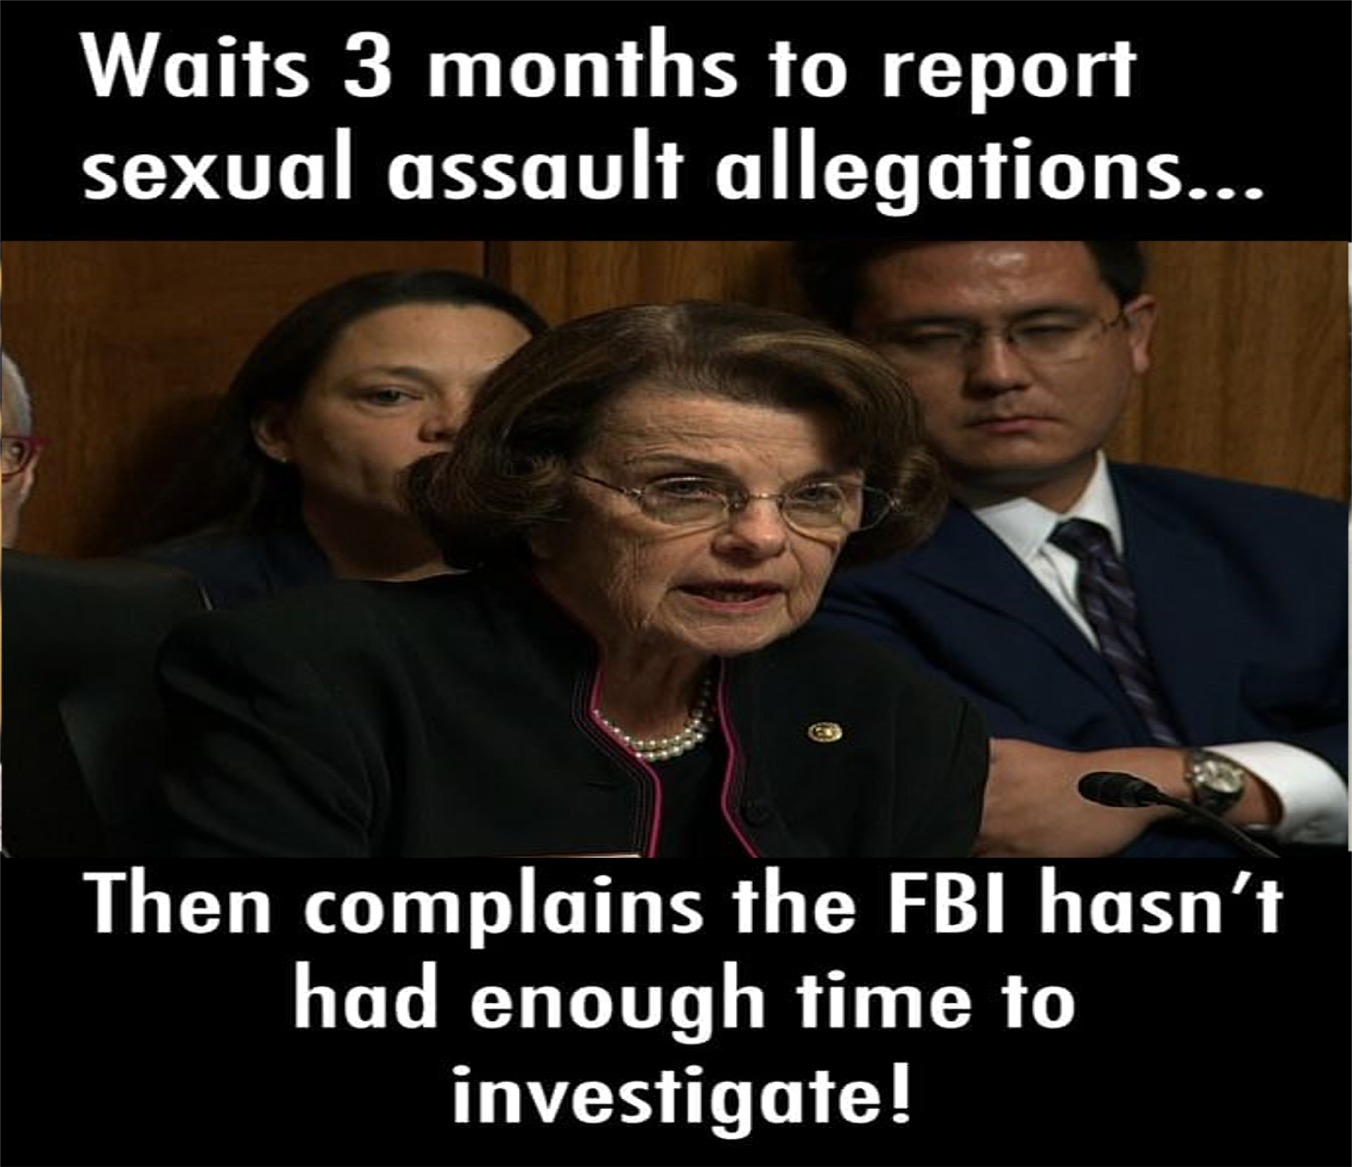 photo caption - Waits 3 months to report sexual assault allegations... Then complains the Fbi hasn't had enough time to investigate!